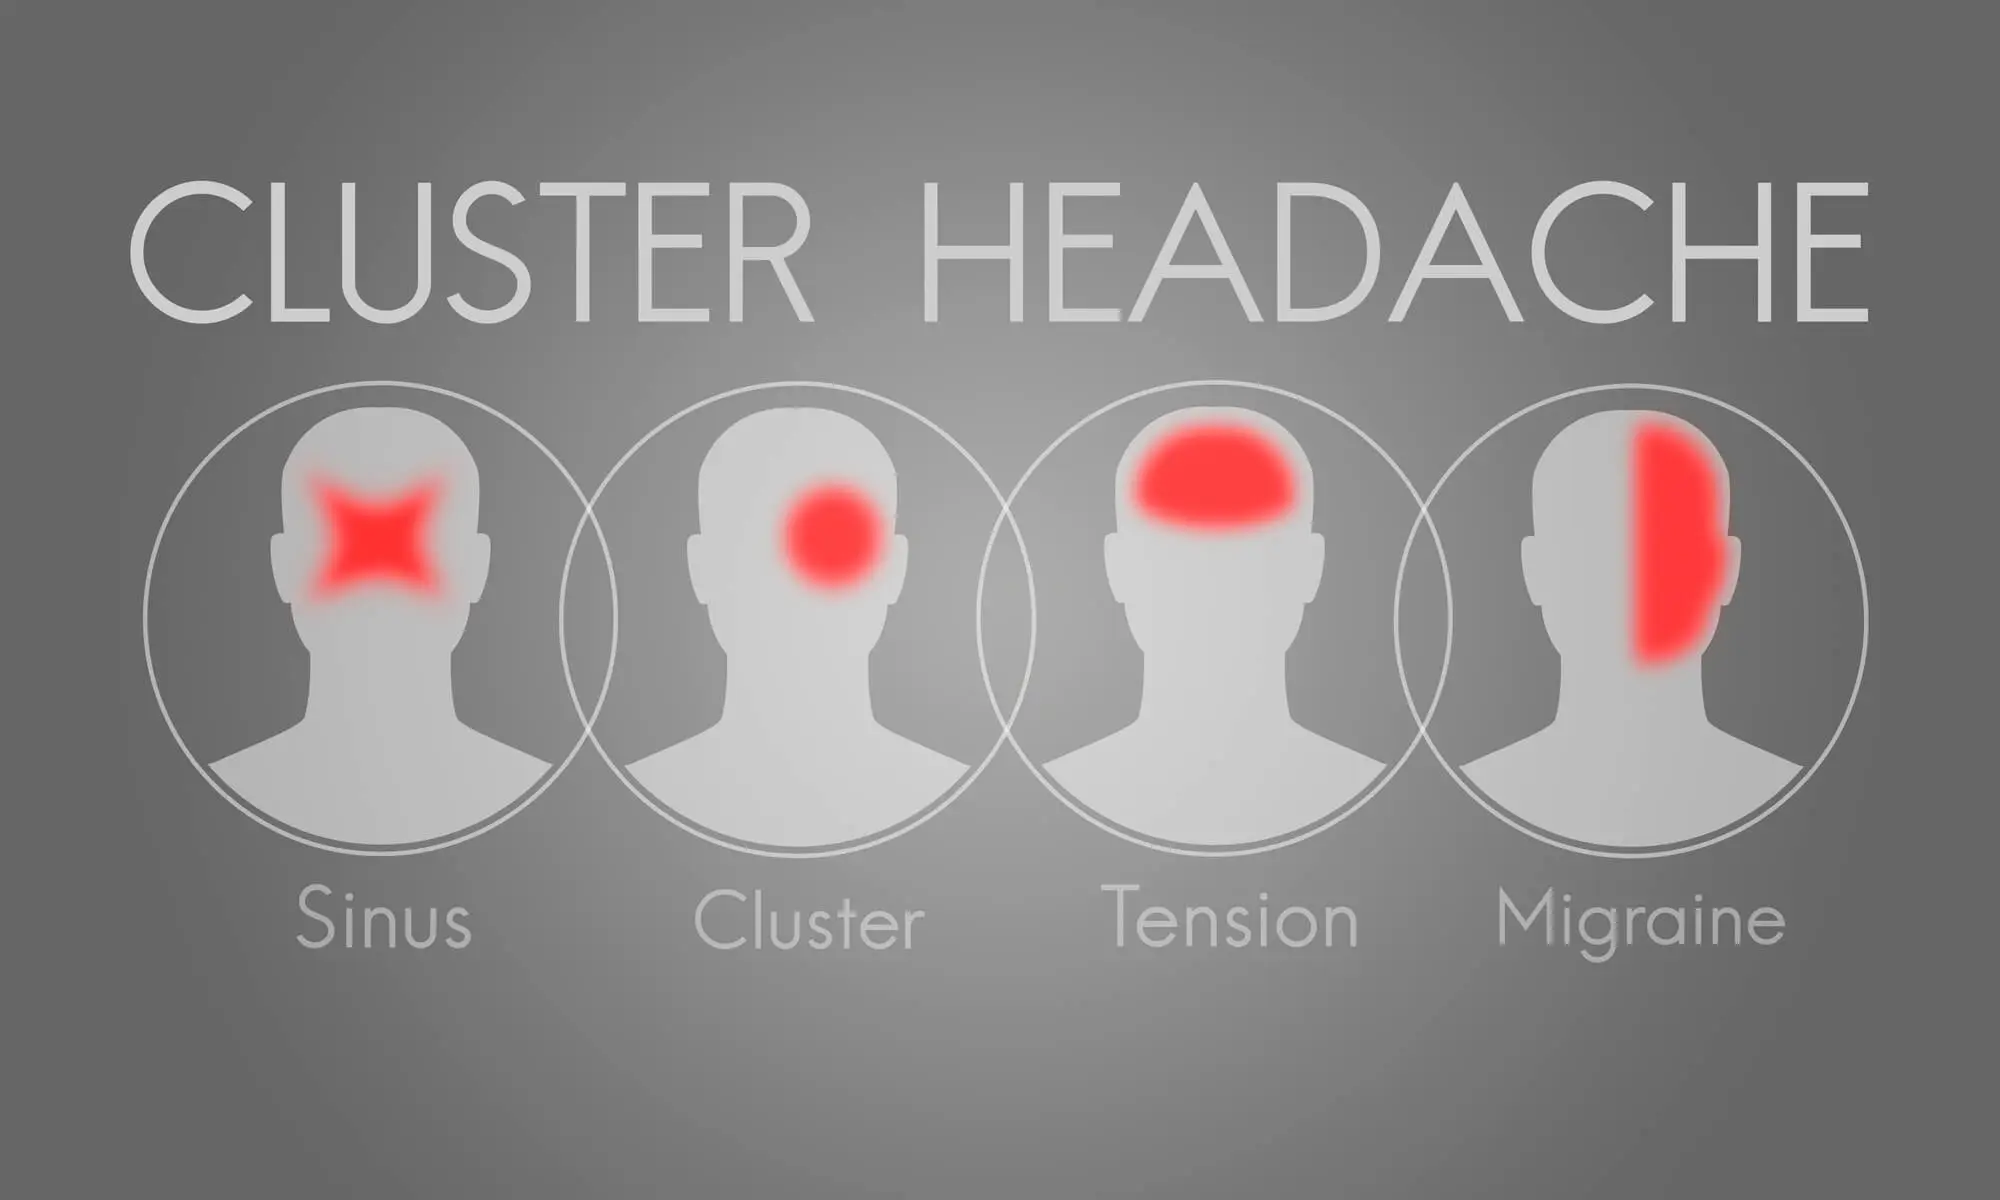 cluster headaches affected areas vs sinus, tension and migraine headaches